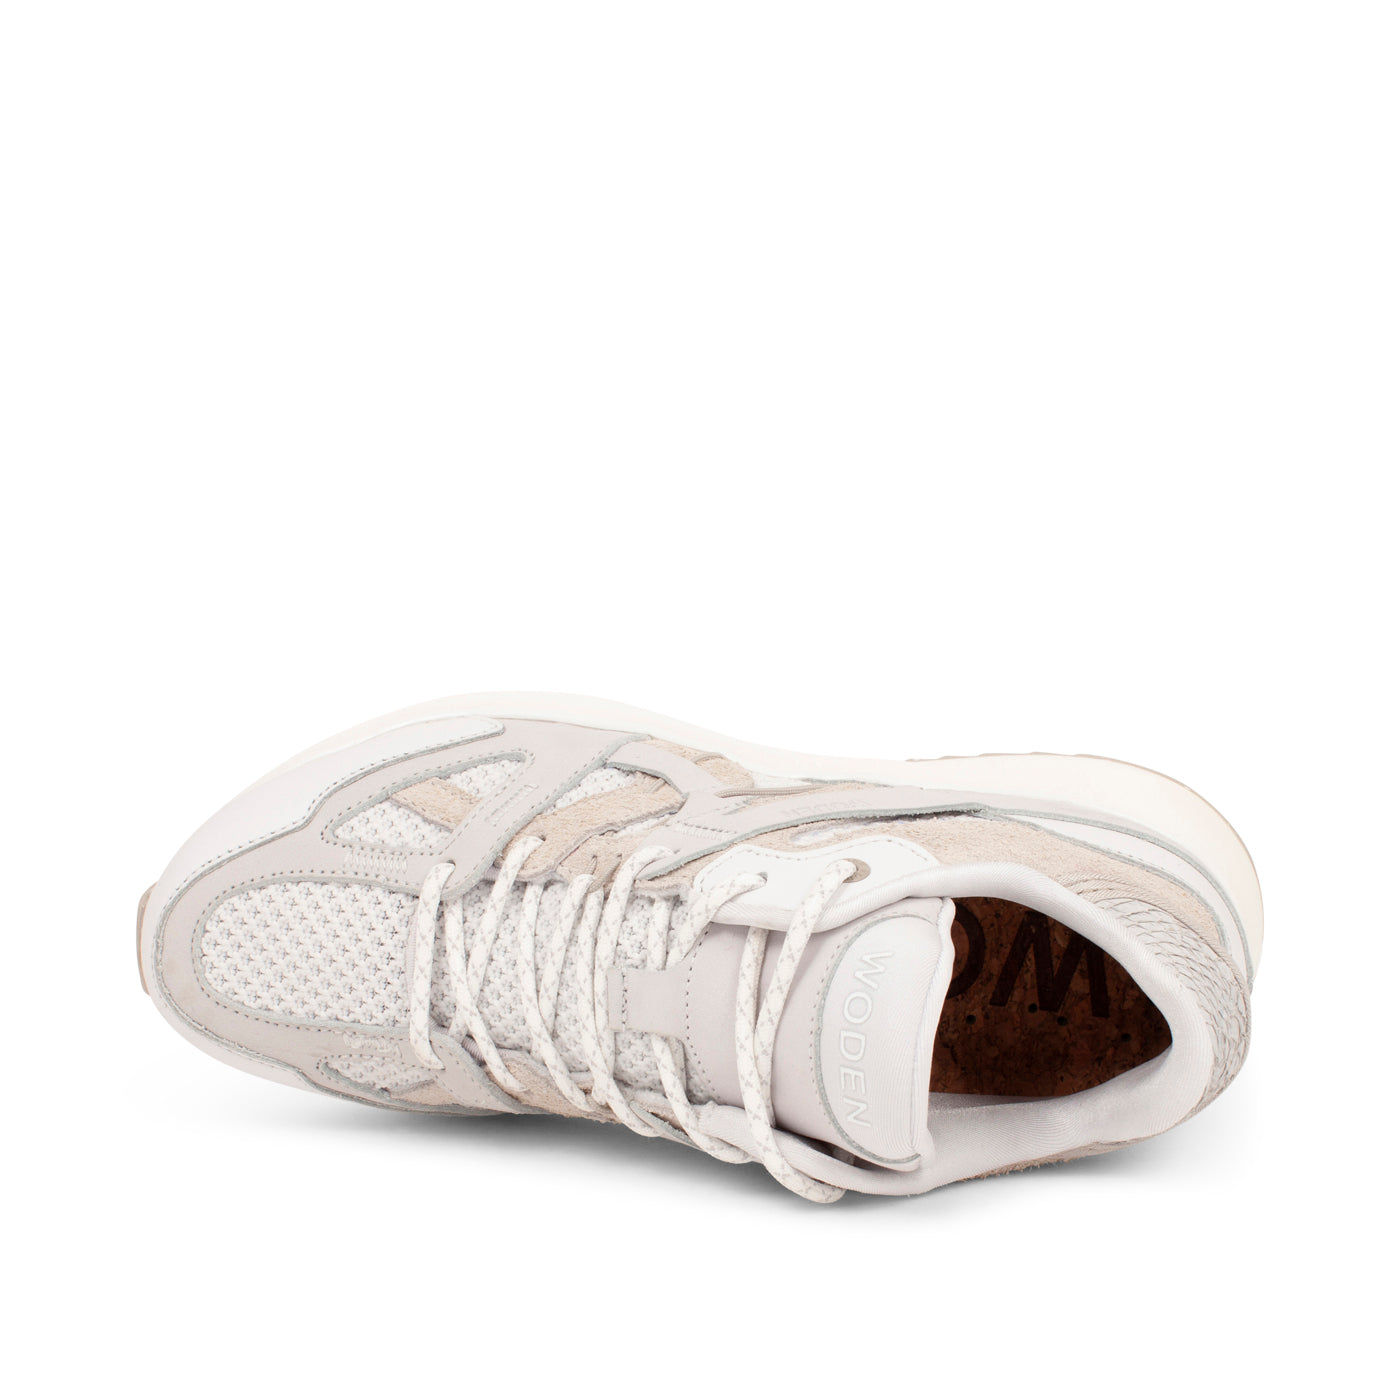 WODEN Eve Suede Mesh Sneakers 300 Bright White